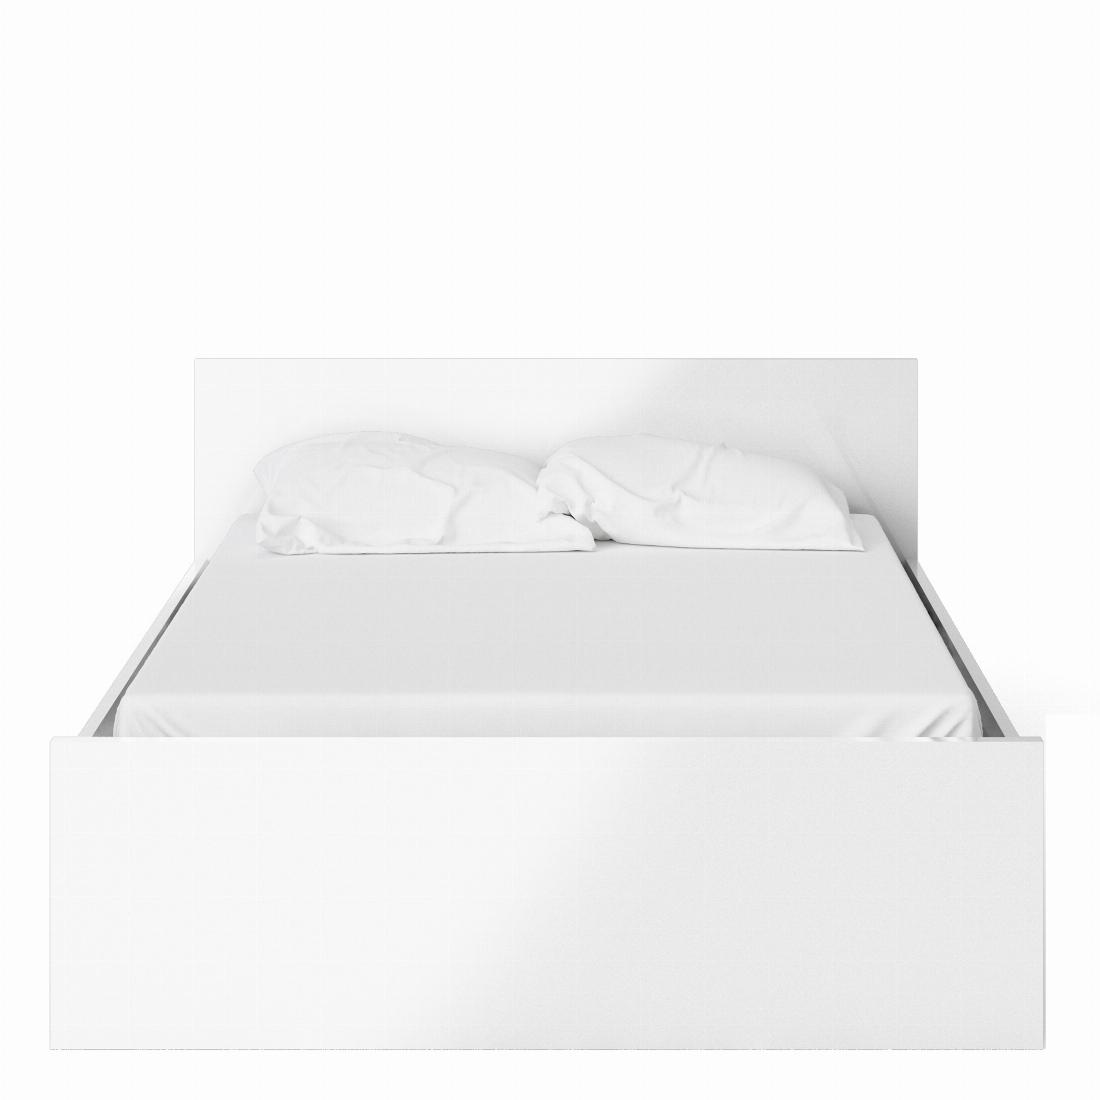 Naia Double Bed 4ft6 (140 x 190) in White High Gloss